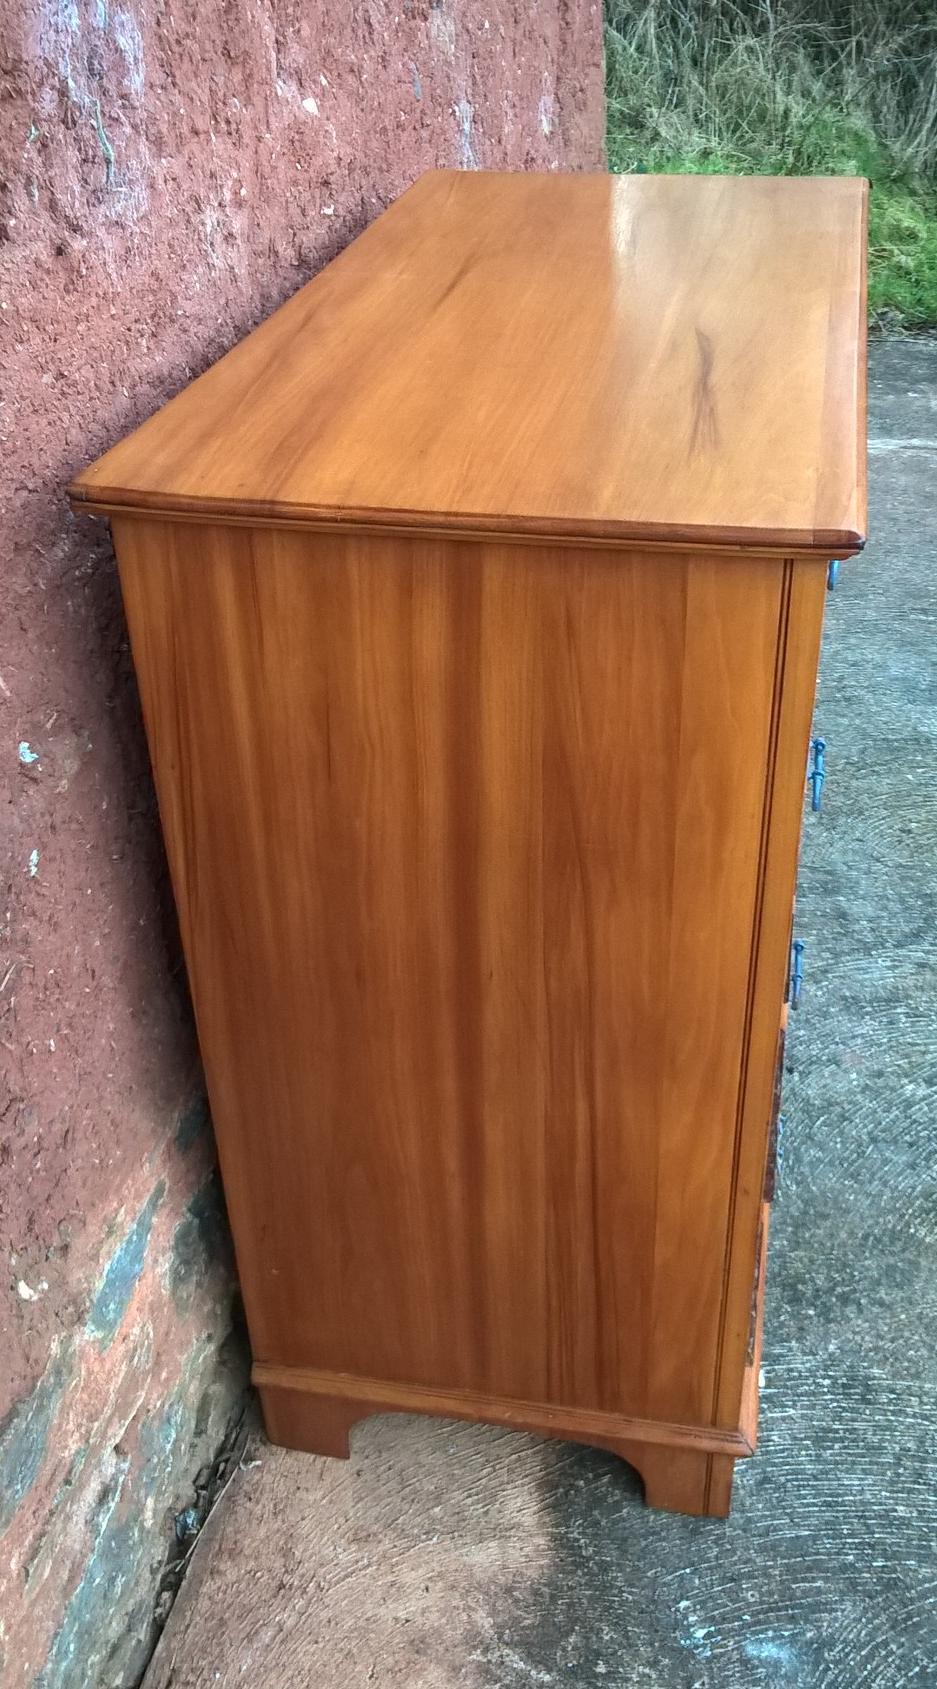 Vintage Hand Stripped Chest Of Drawers - Satin Walnut Chest